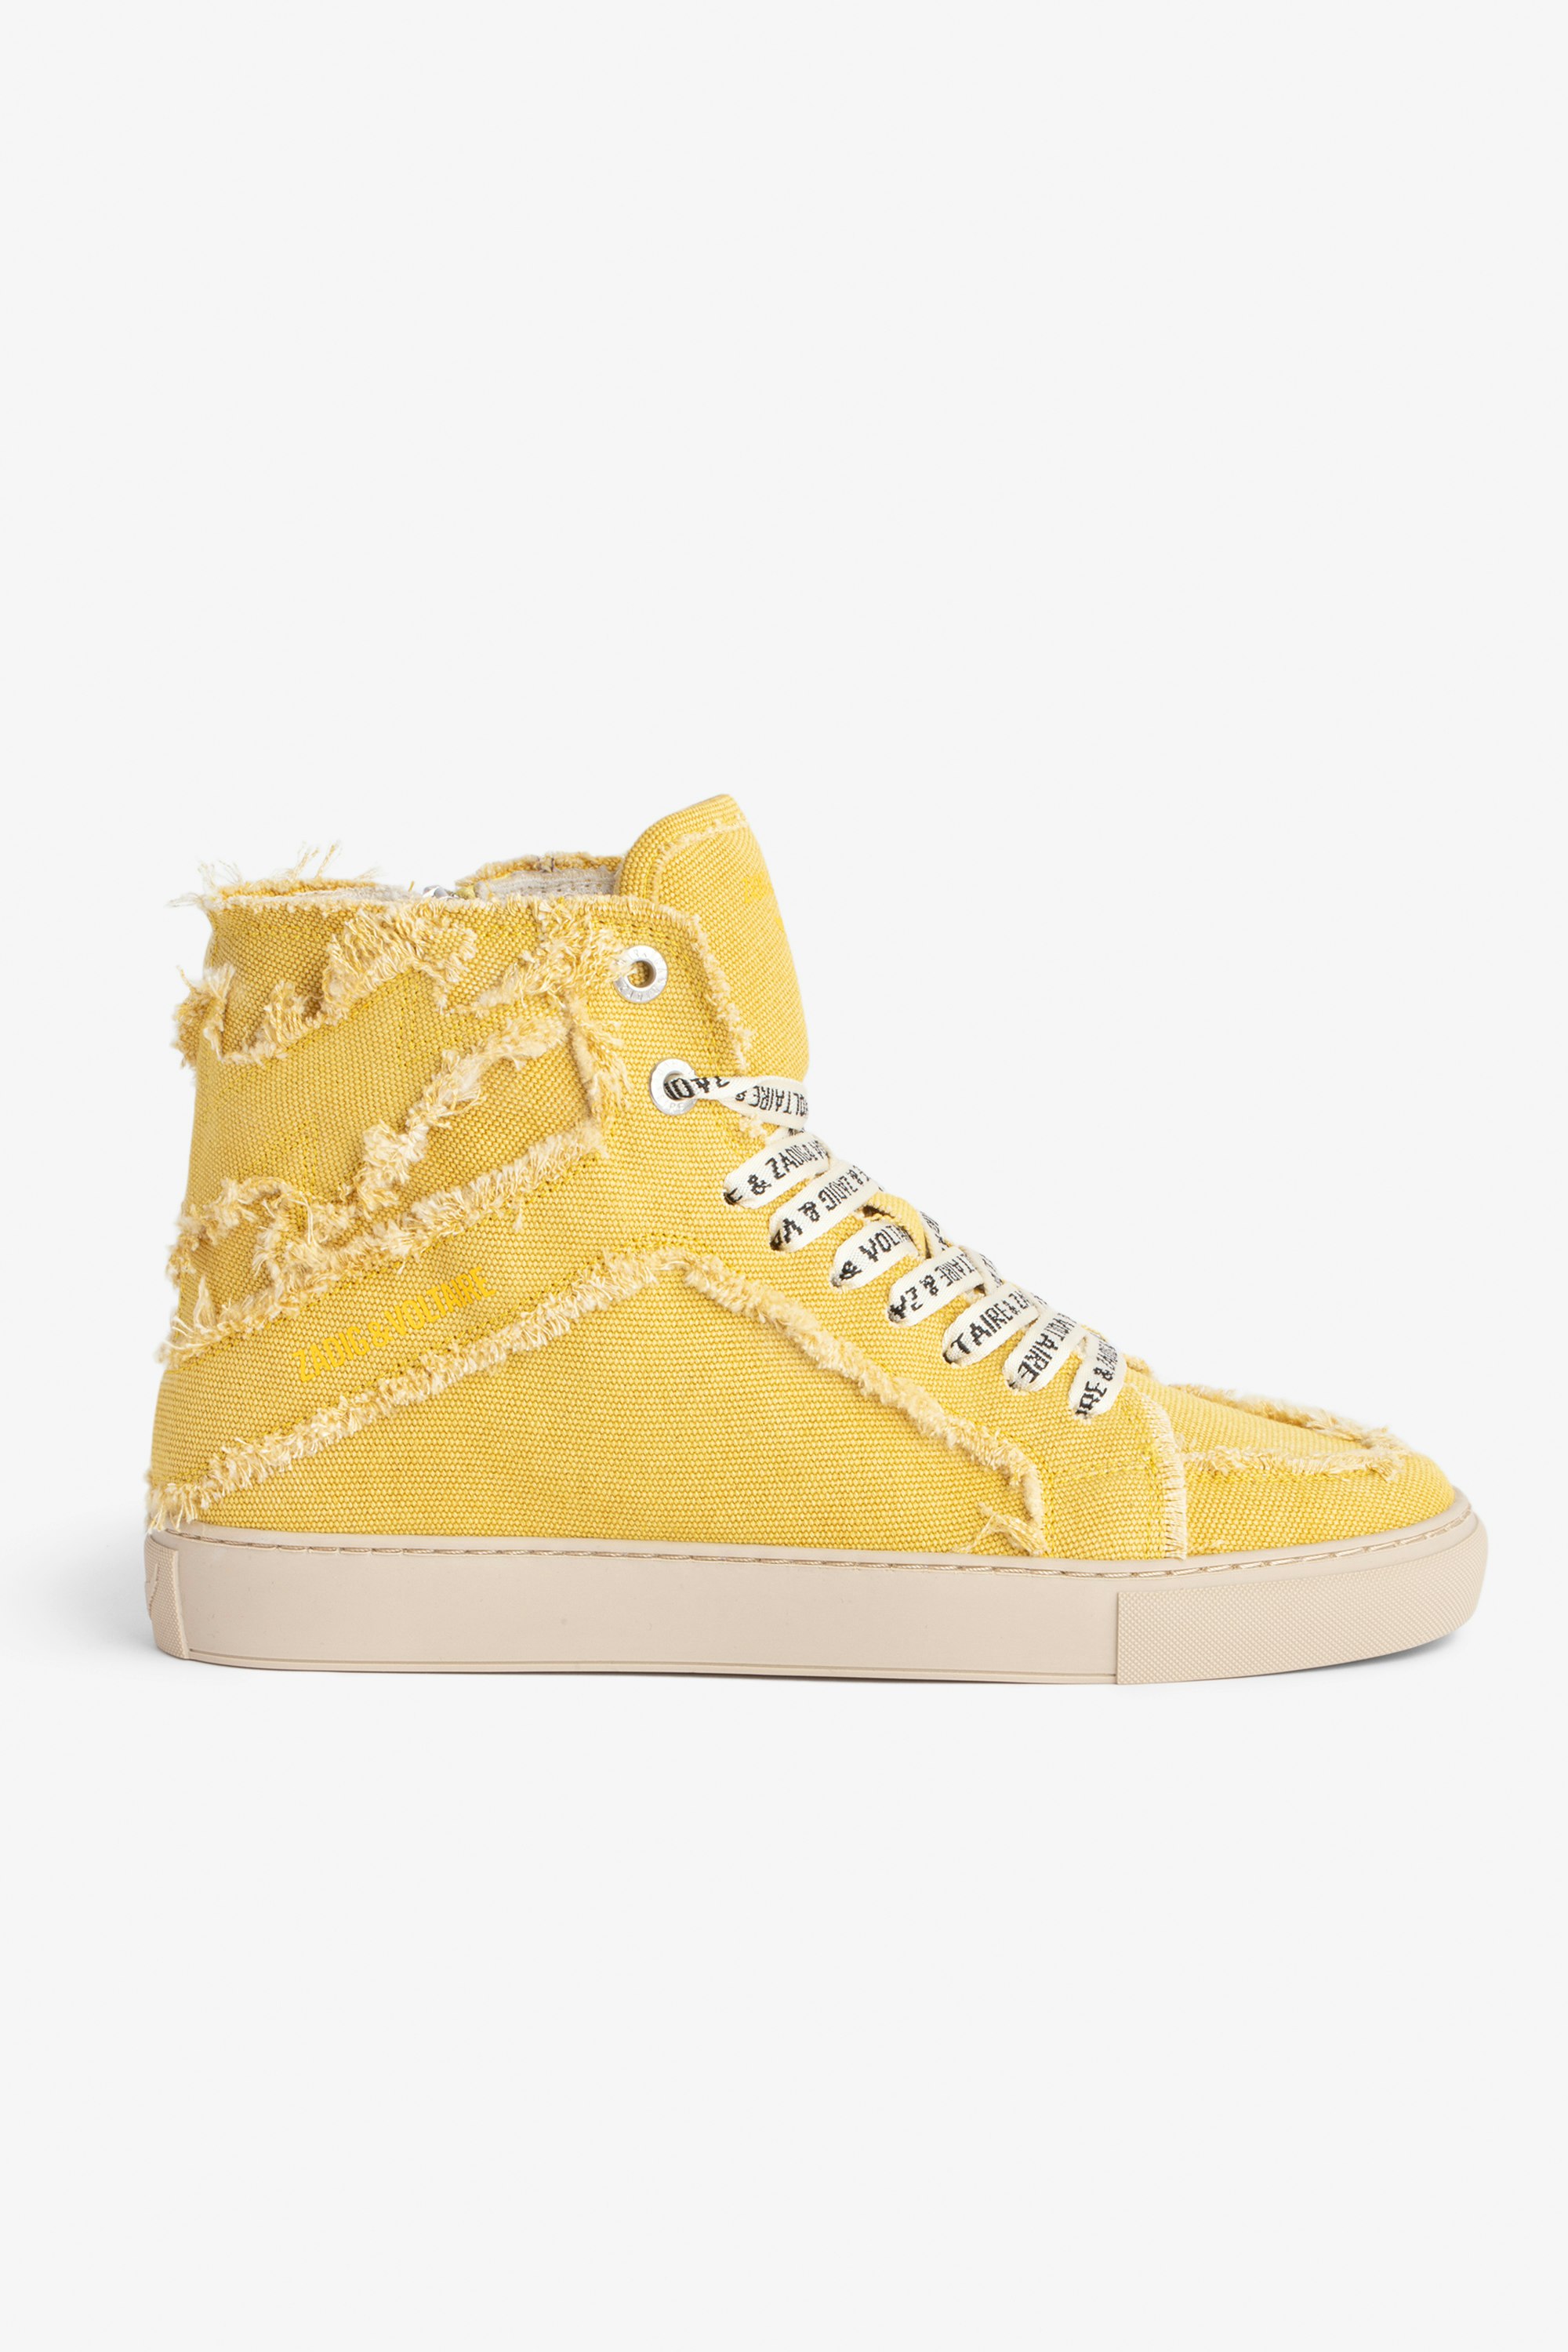 ZV1747 High Flash High-Top Trainers Women's high-top trainers in yellow cotton canvas